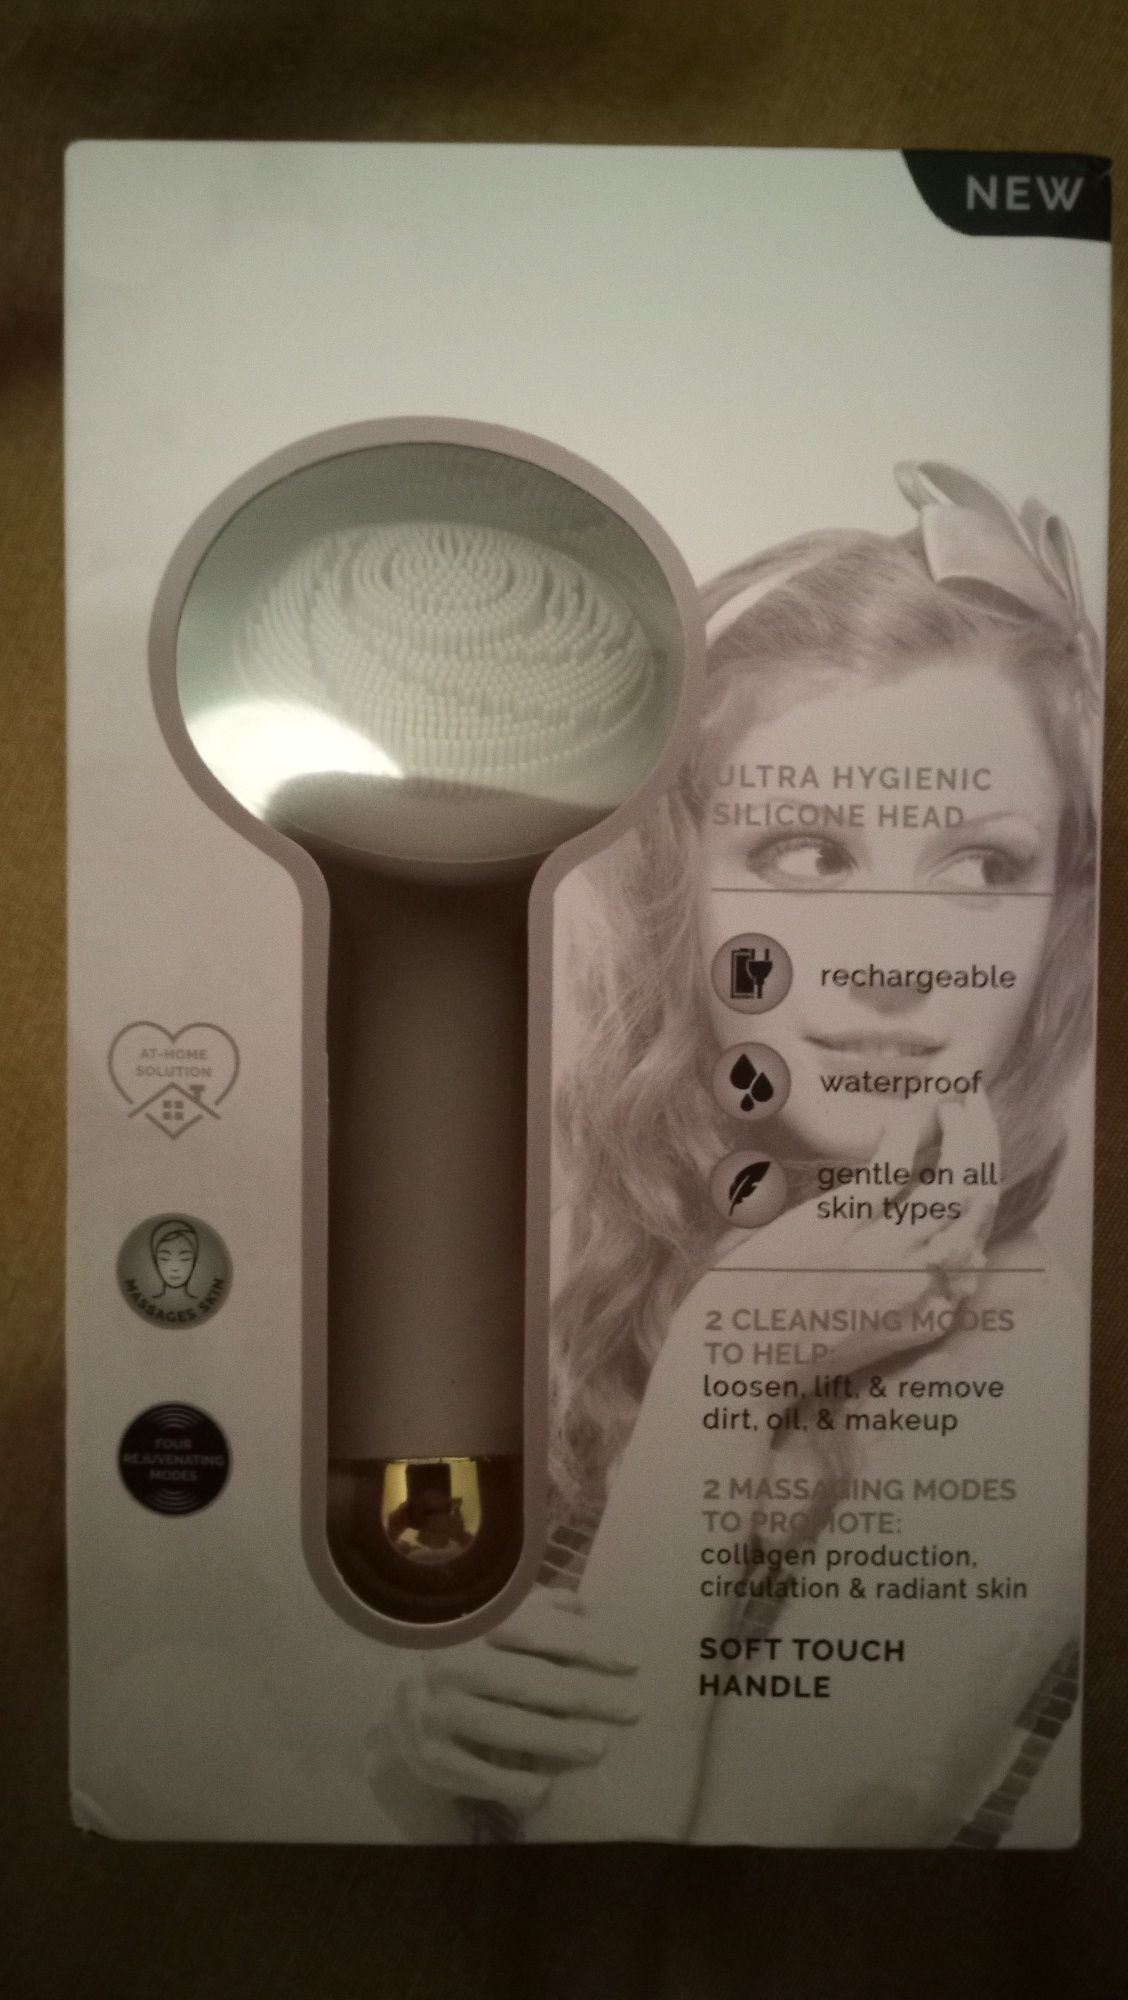 CLEANSE Facial cleanser & massager.